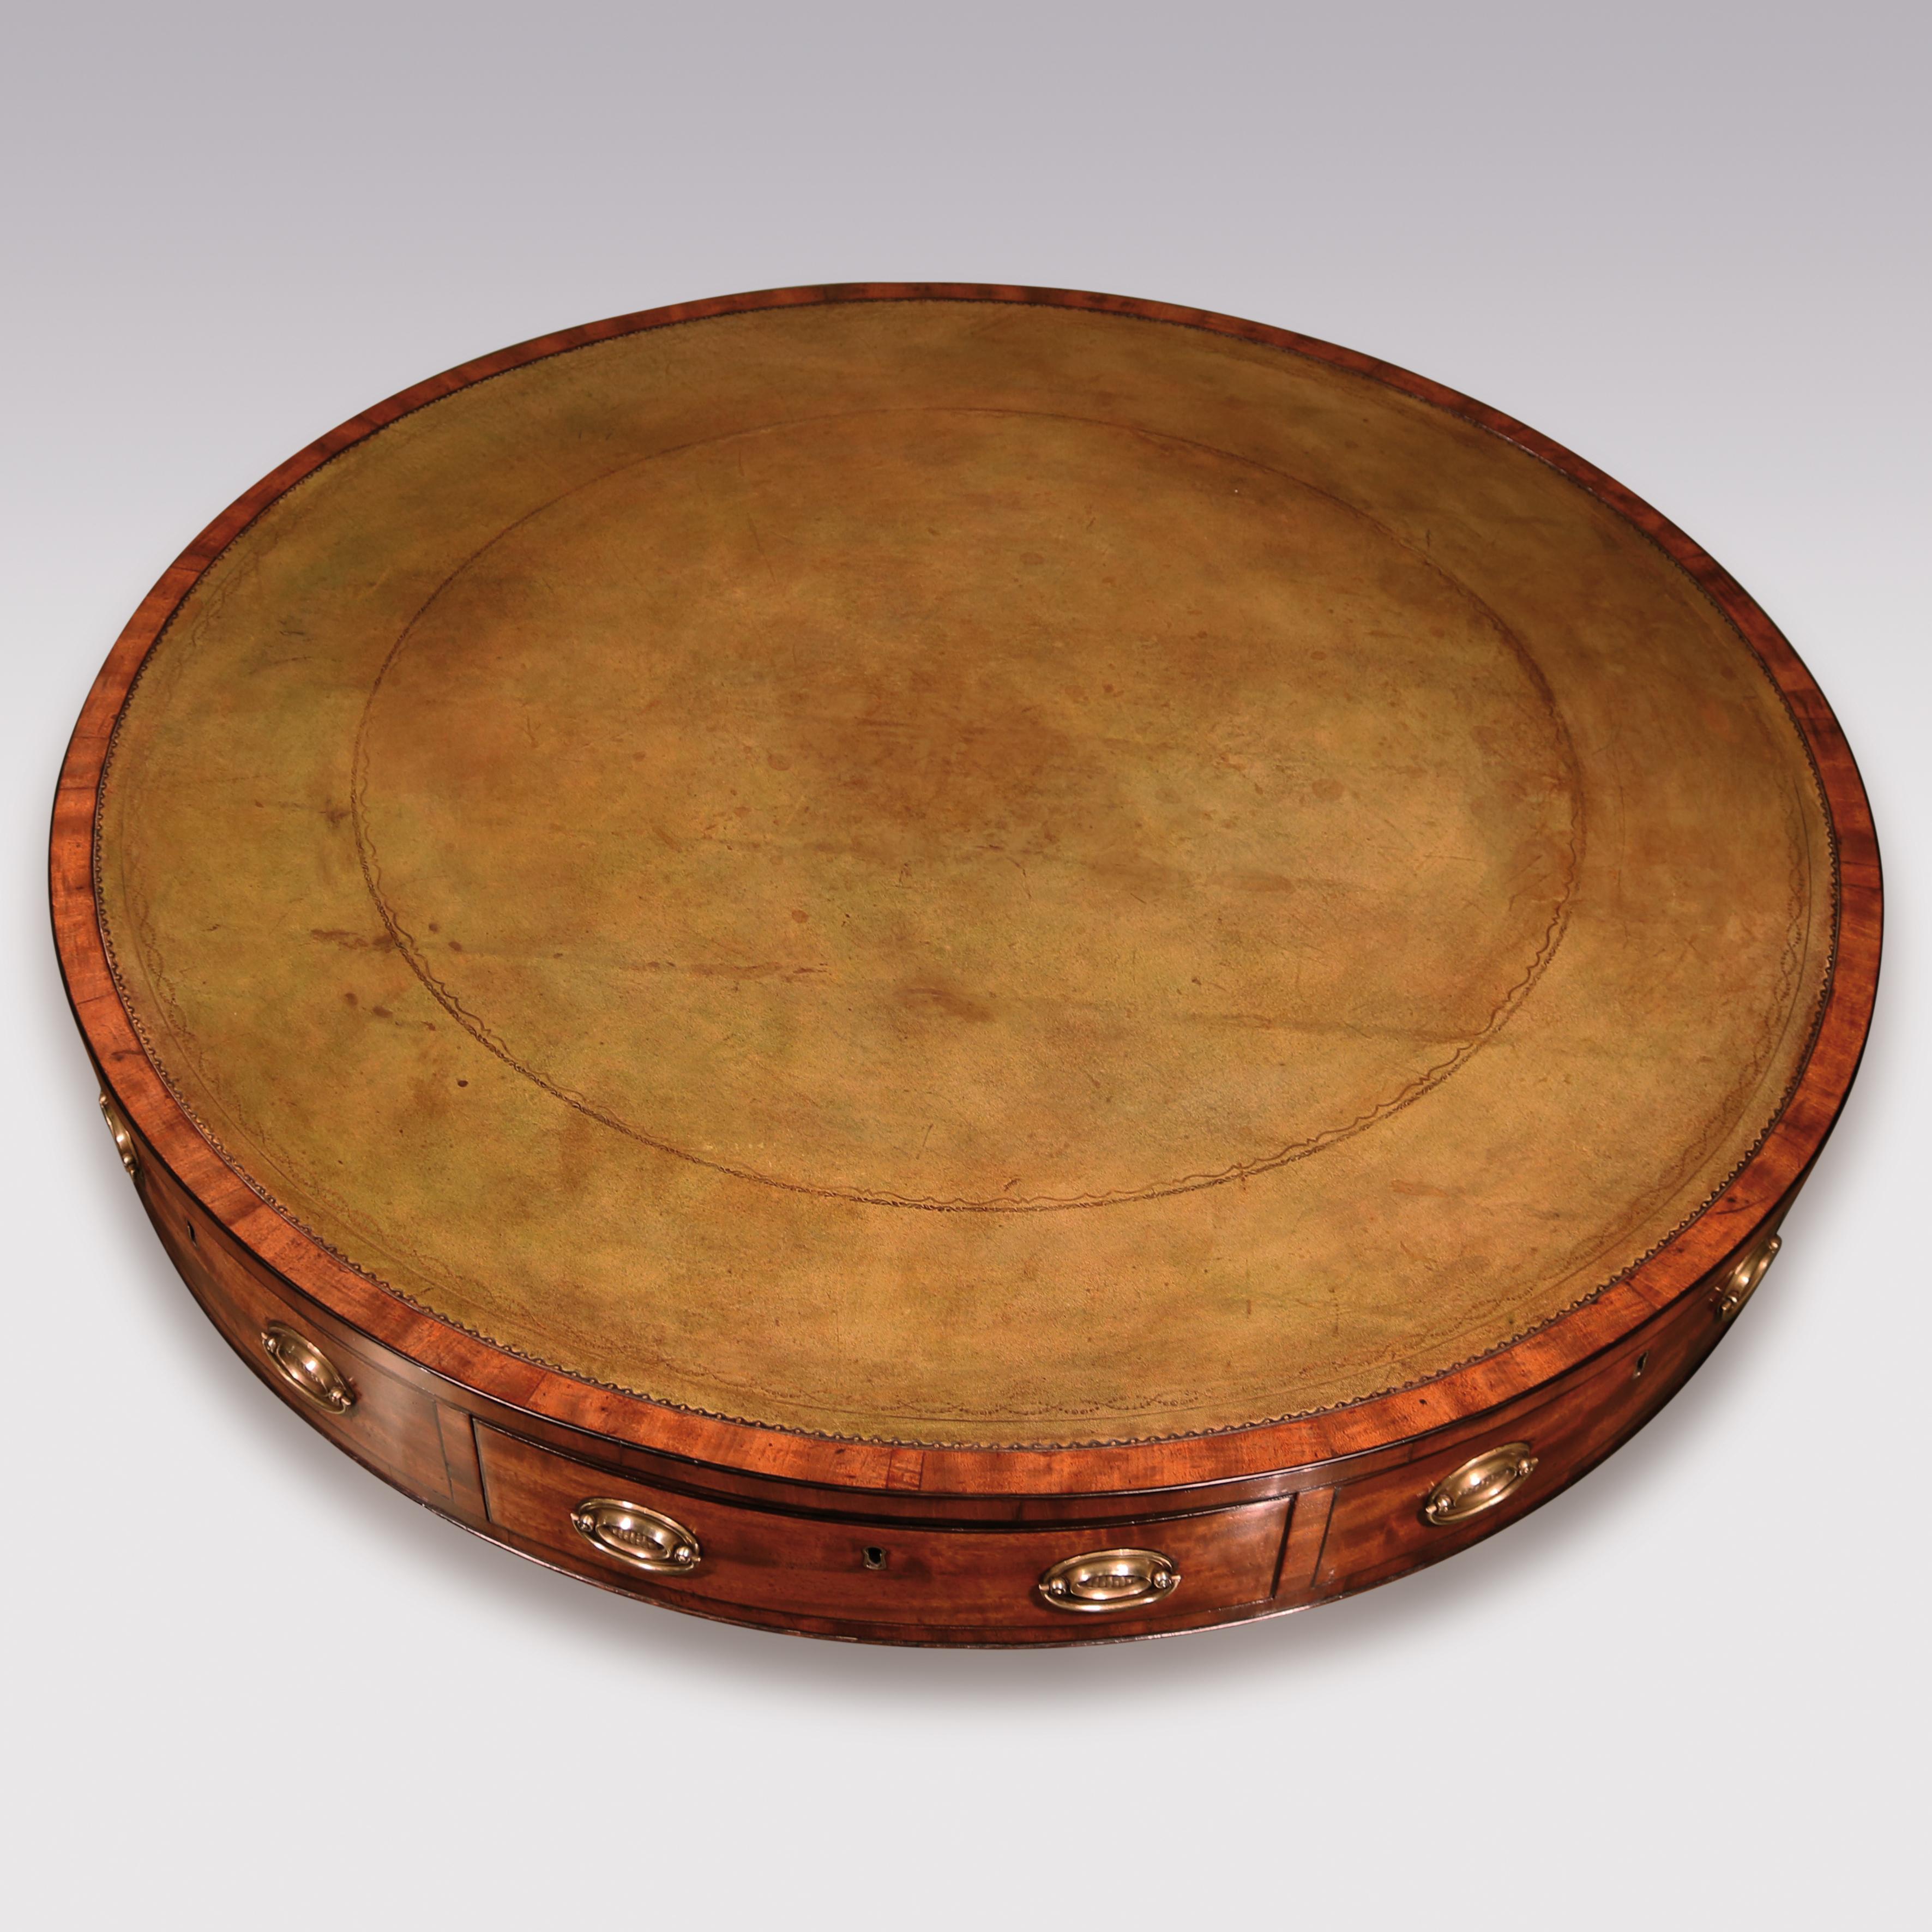 A George III period well-figured mahogany revolving drum table, ebony strung throughout, having green tooled leather circular top above frieze drawers supported on turned stem with reeded 4-splay legs ending on original brass castors.